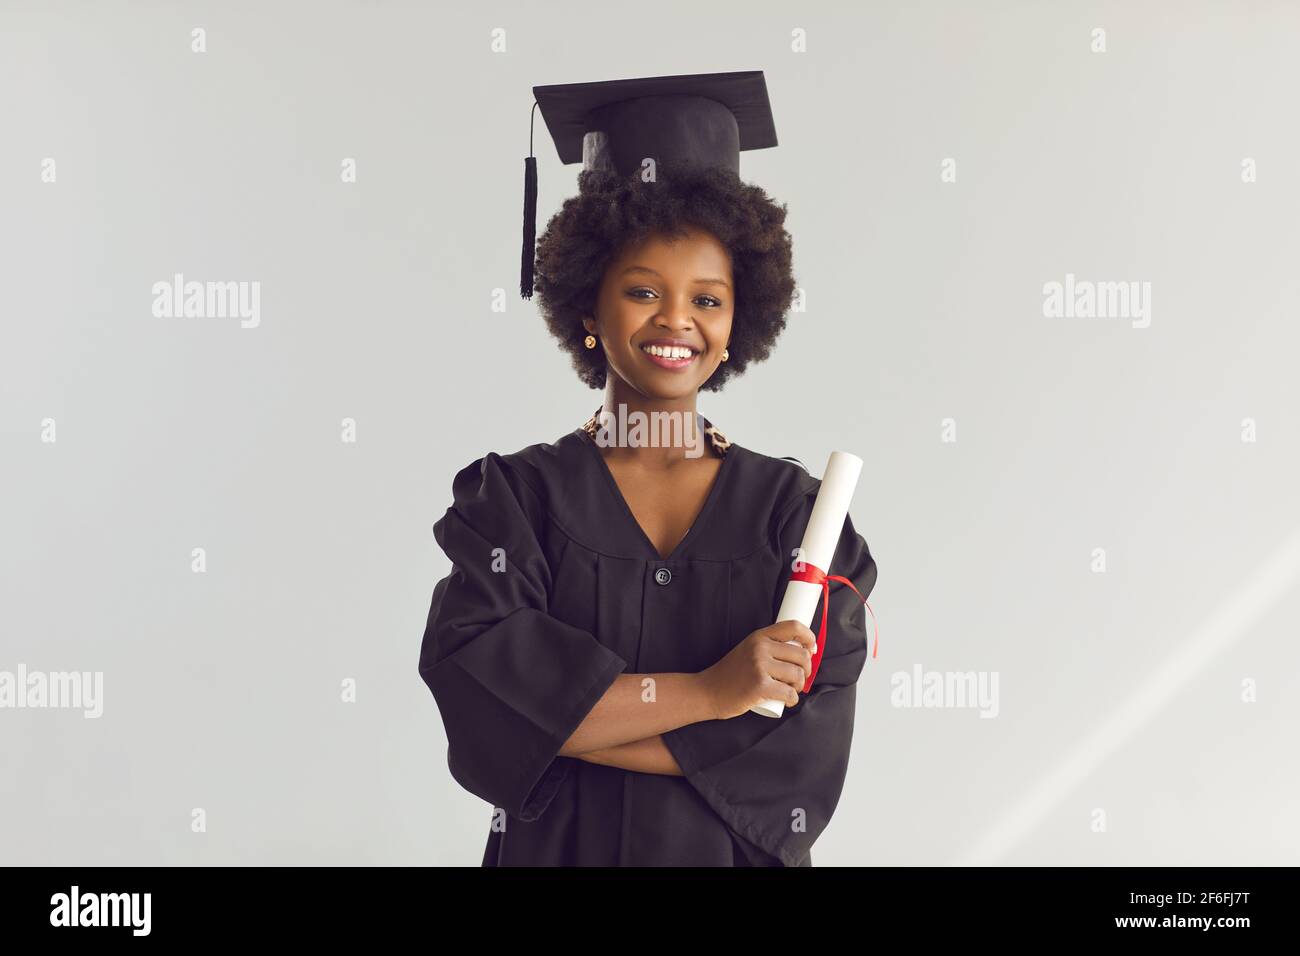 African american high school student with graduate certificate